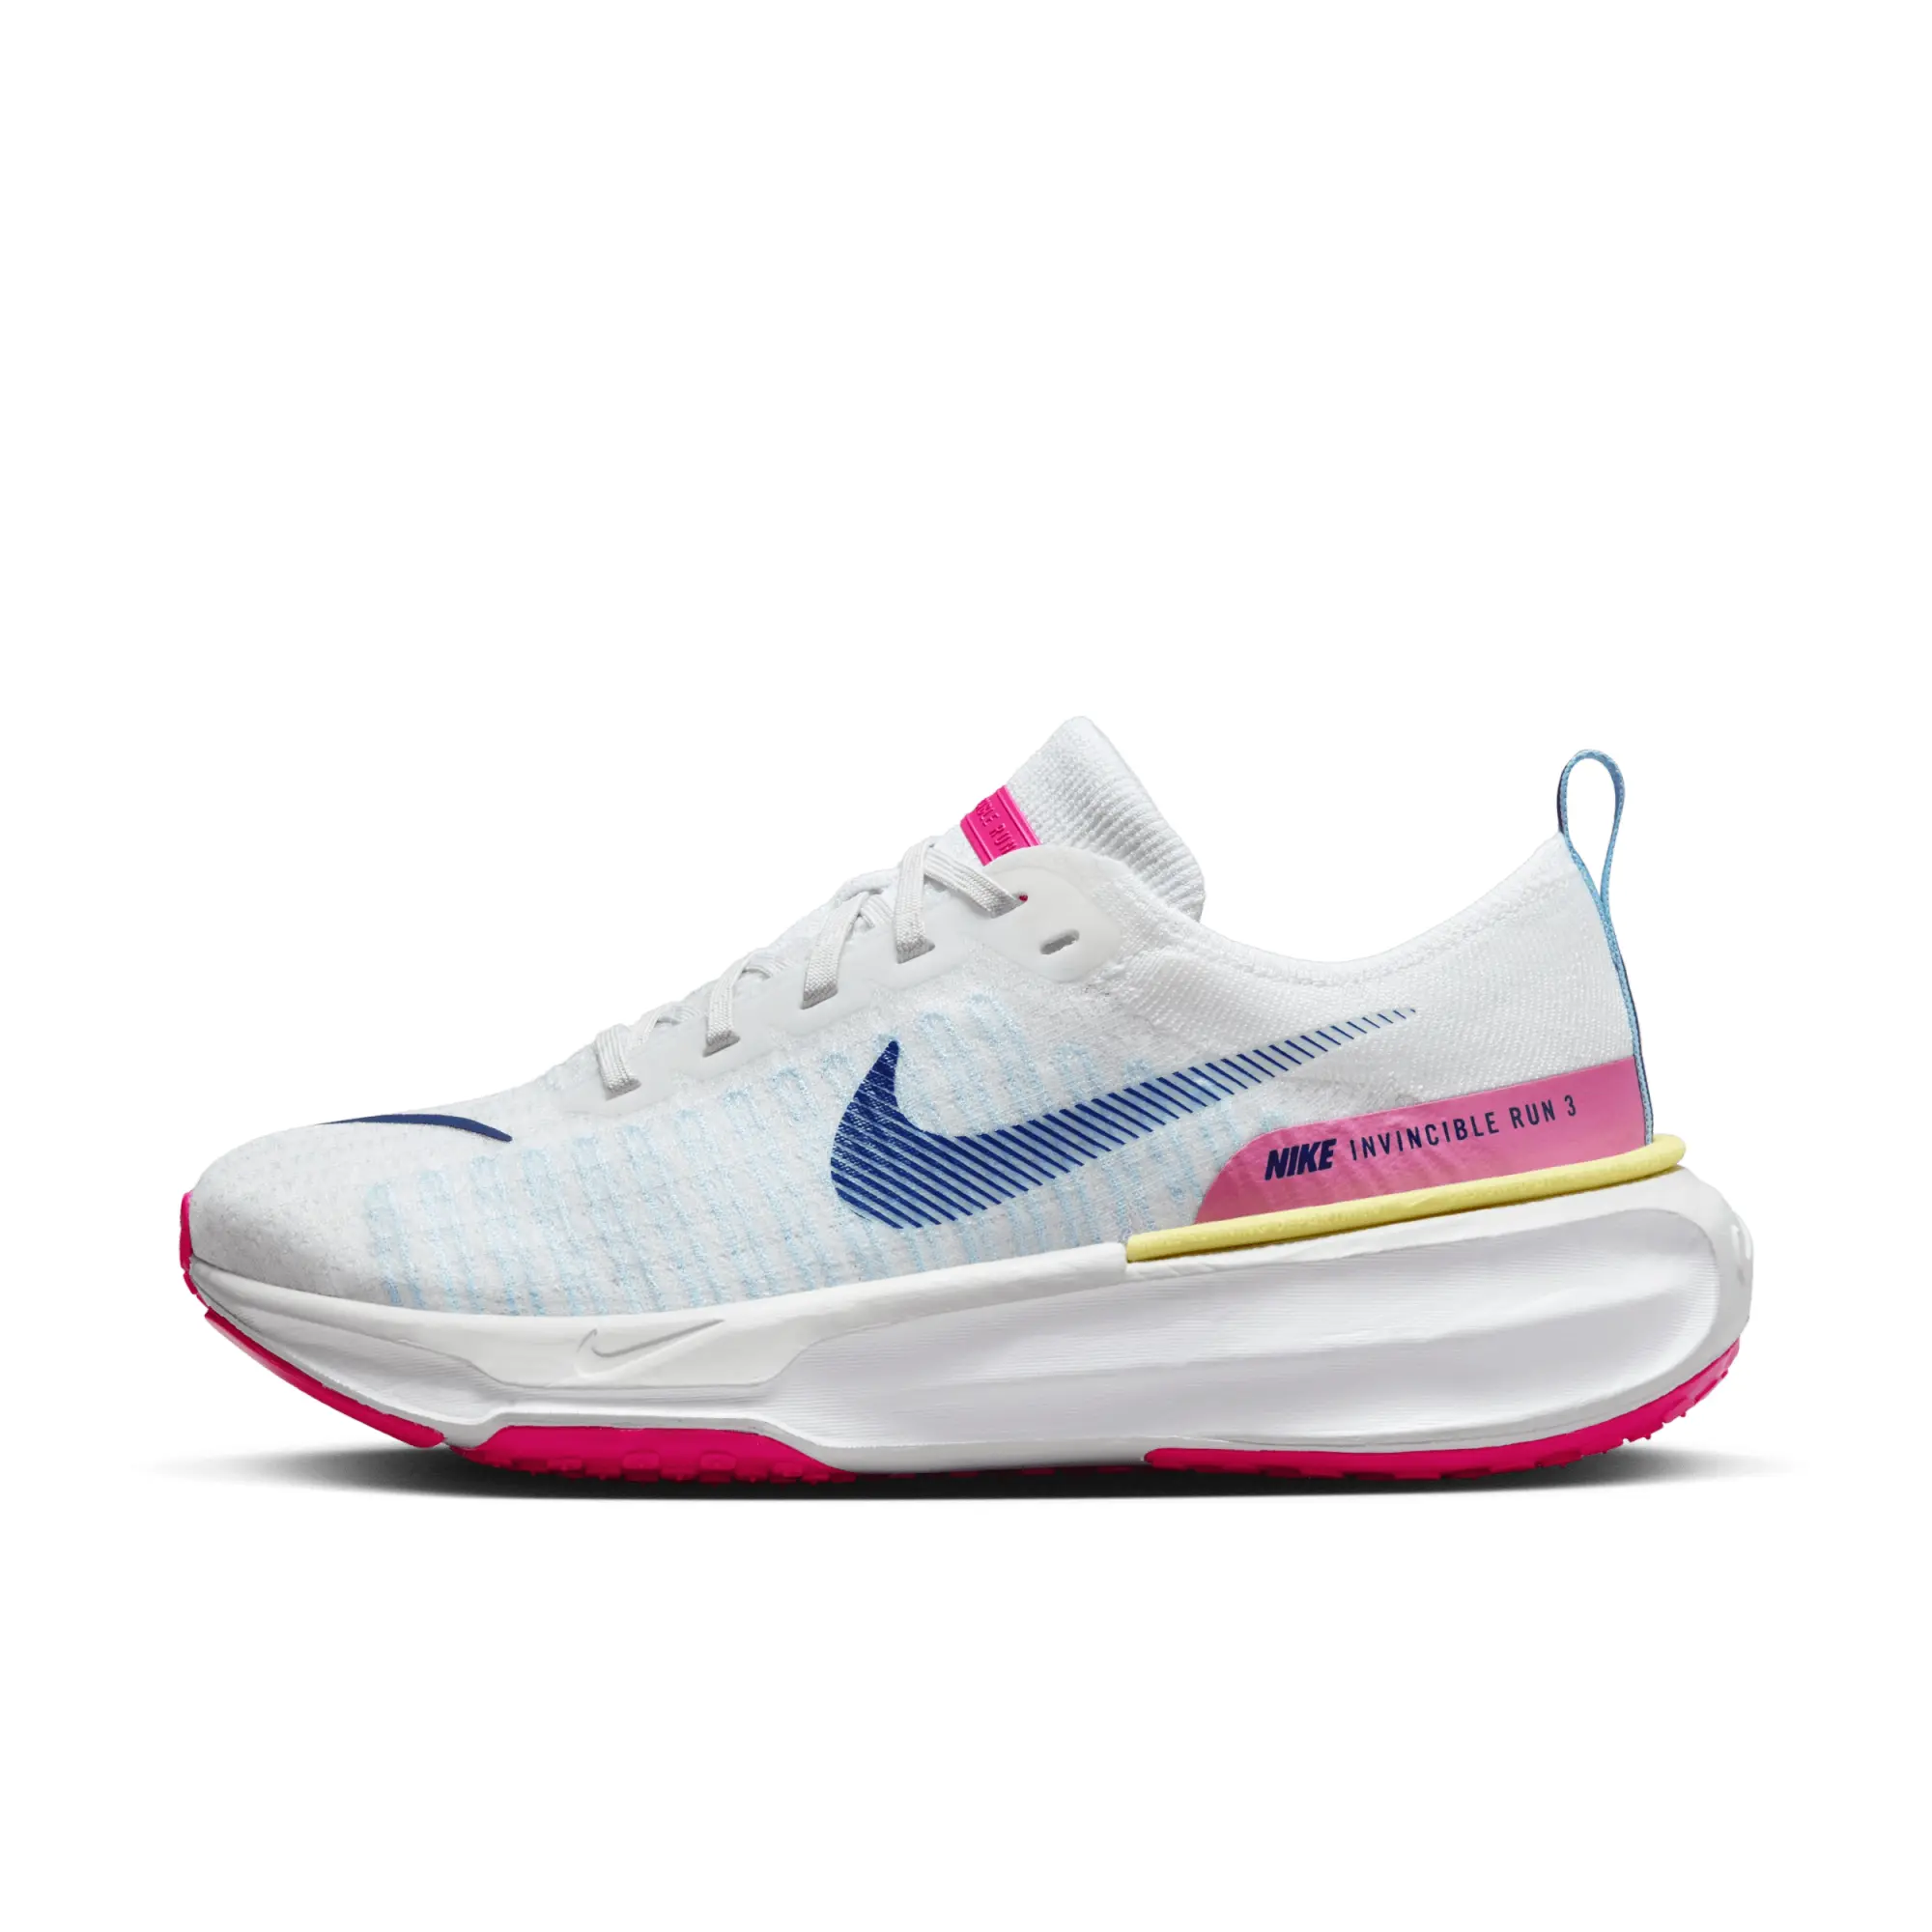 Nike ZoomX Invincible 3 Flyknit Womens Running Shoes